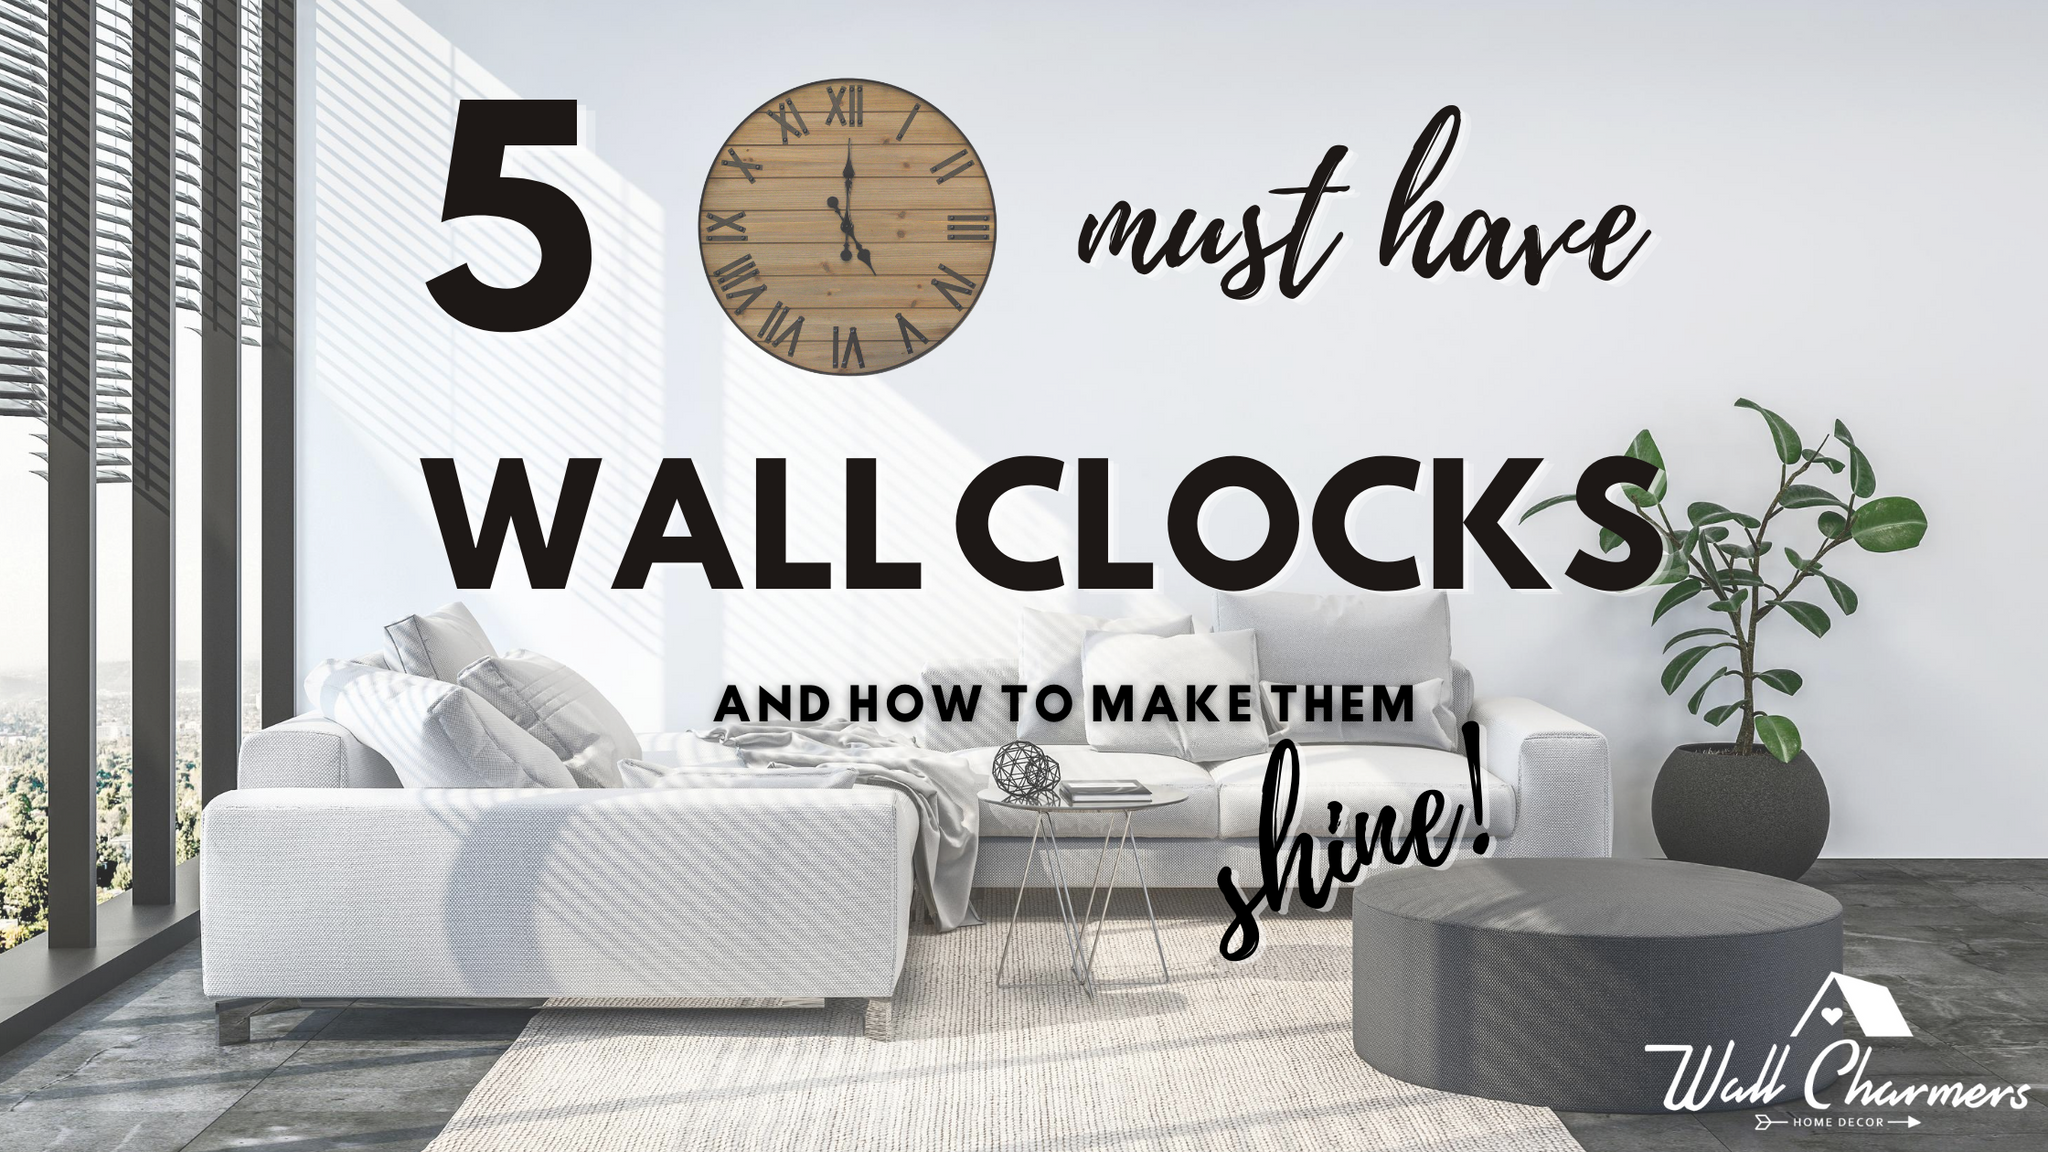 5 Must have Wall Clocks and how to make them SHINE!